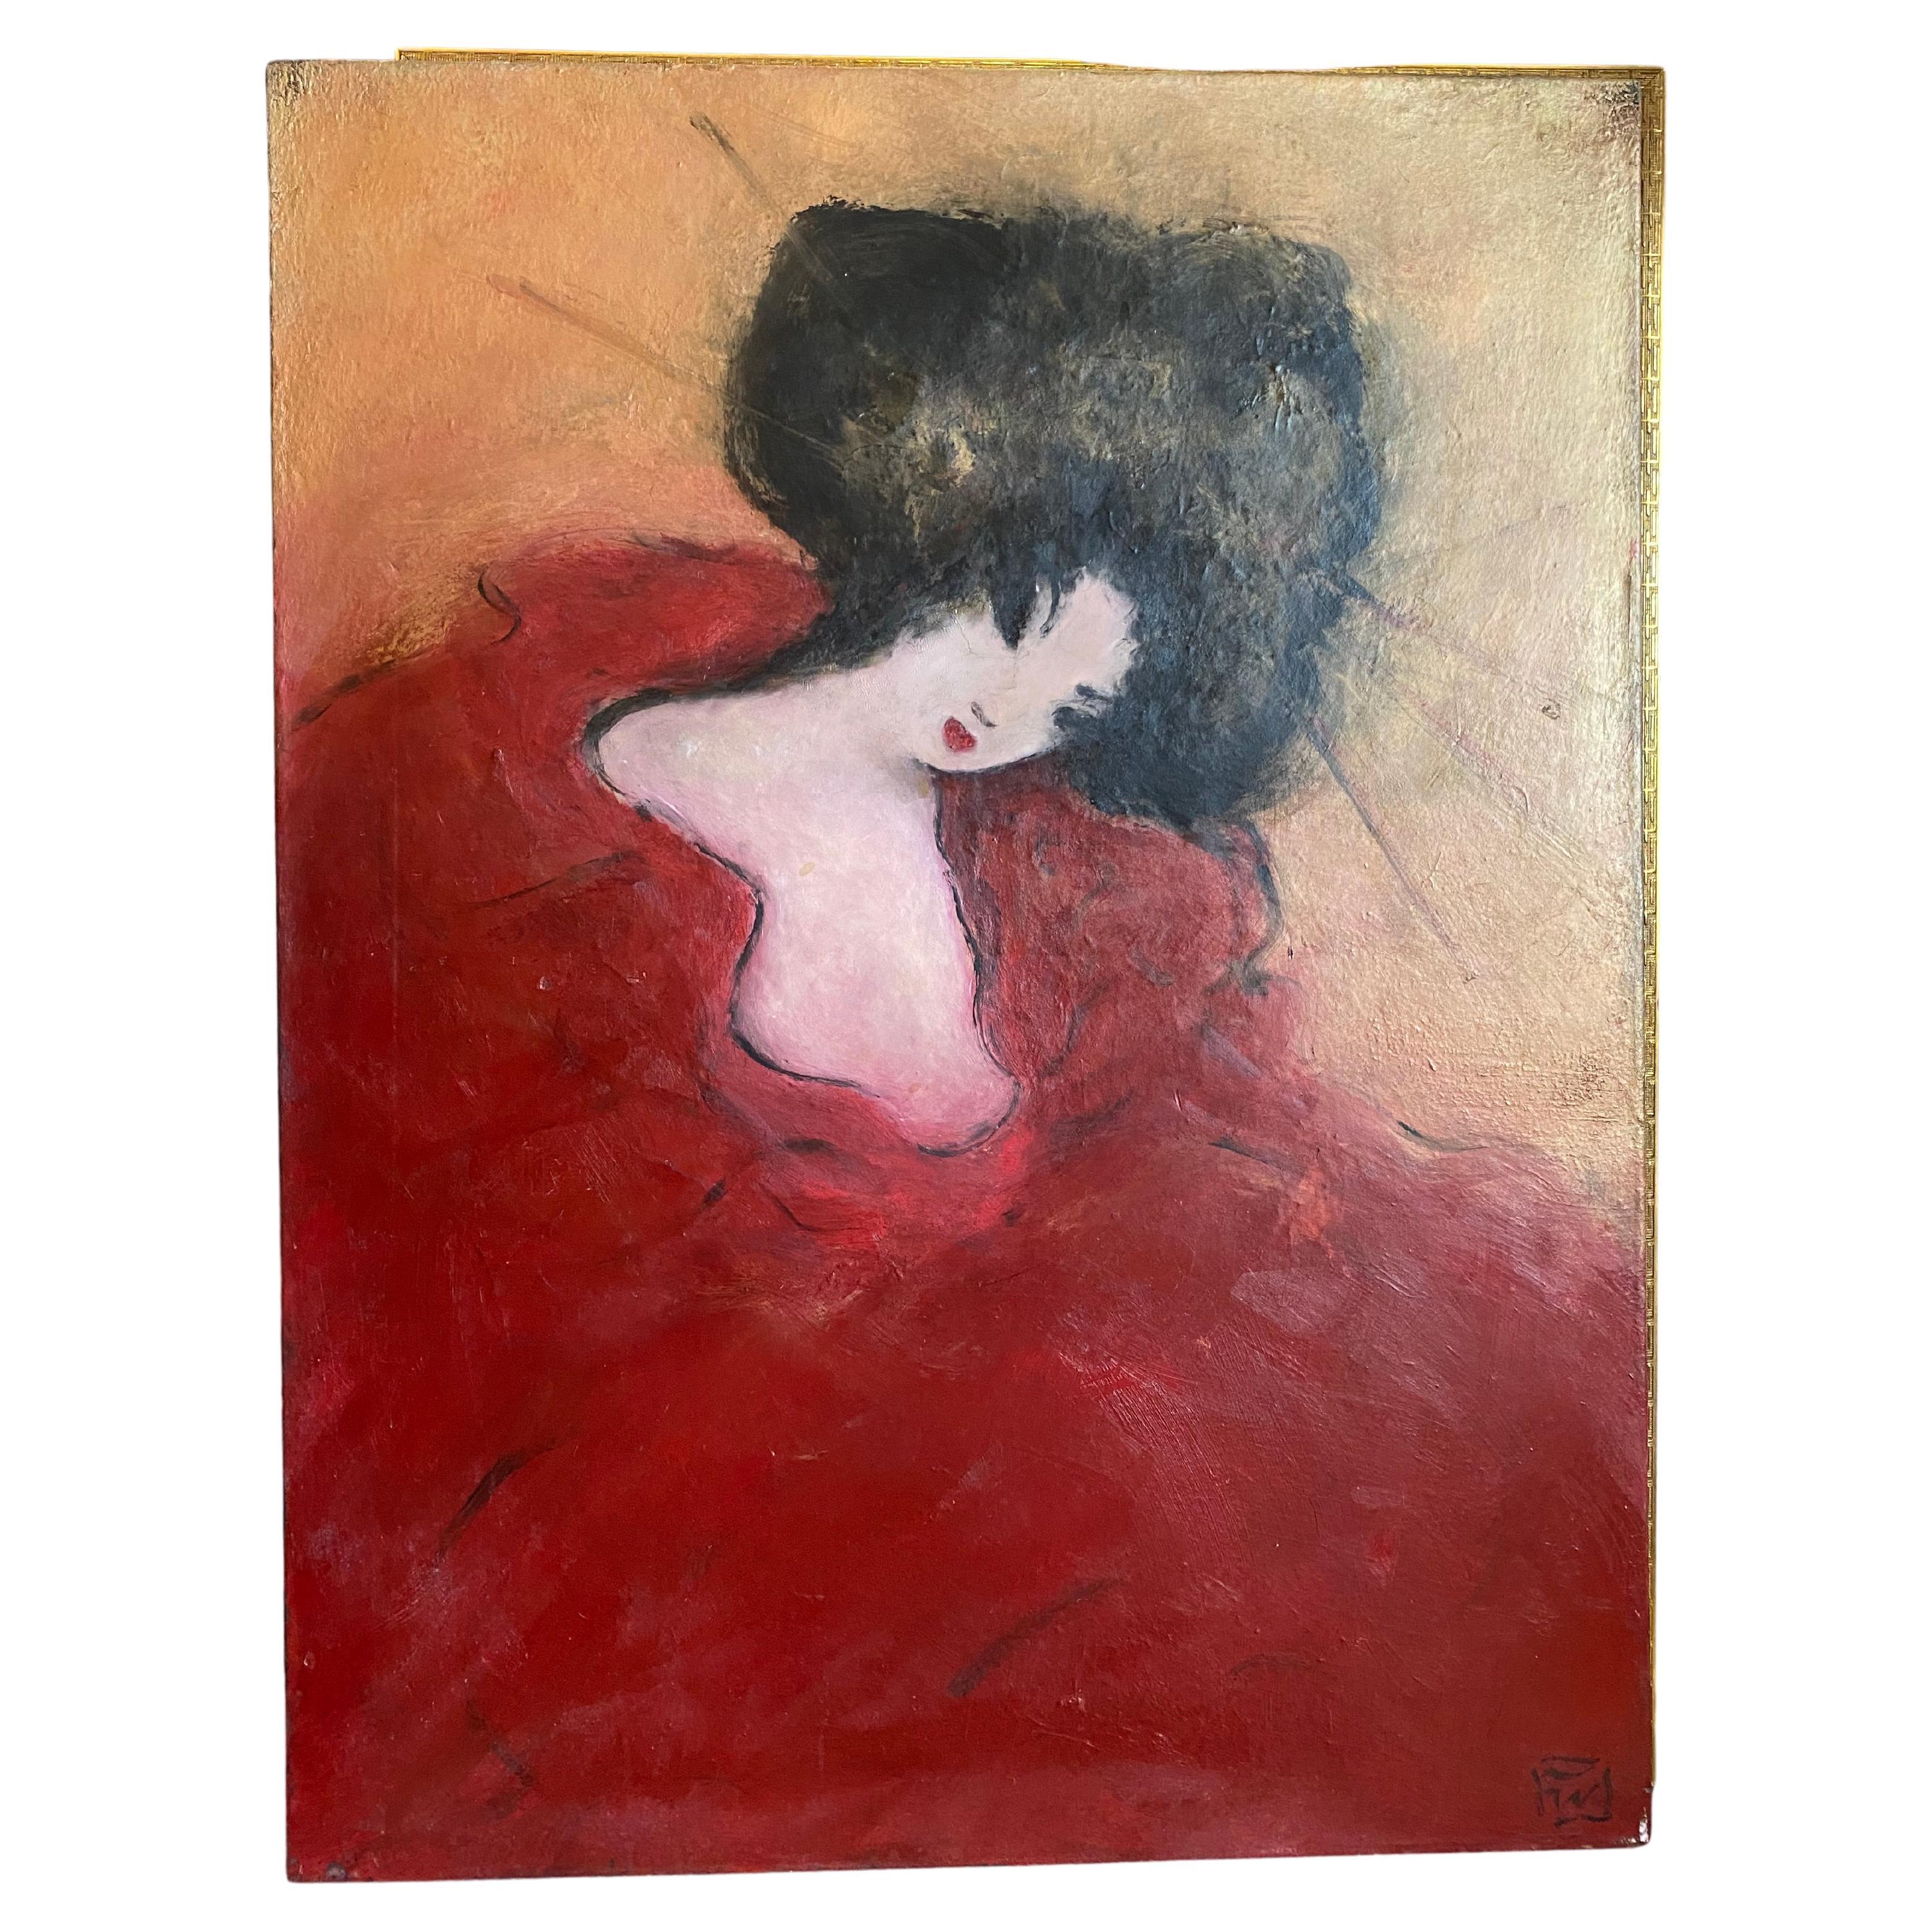 Original Oil Painting Study of "Geisha in Saffron Robe" by Tony Walholm For Sale